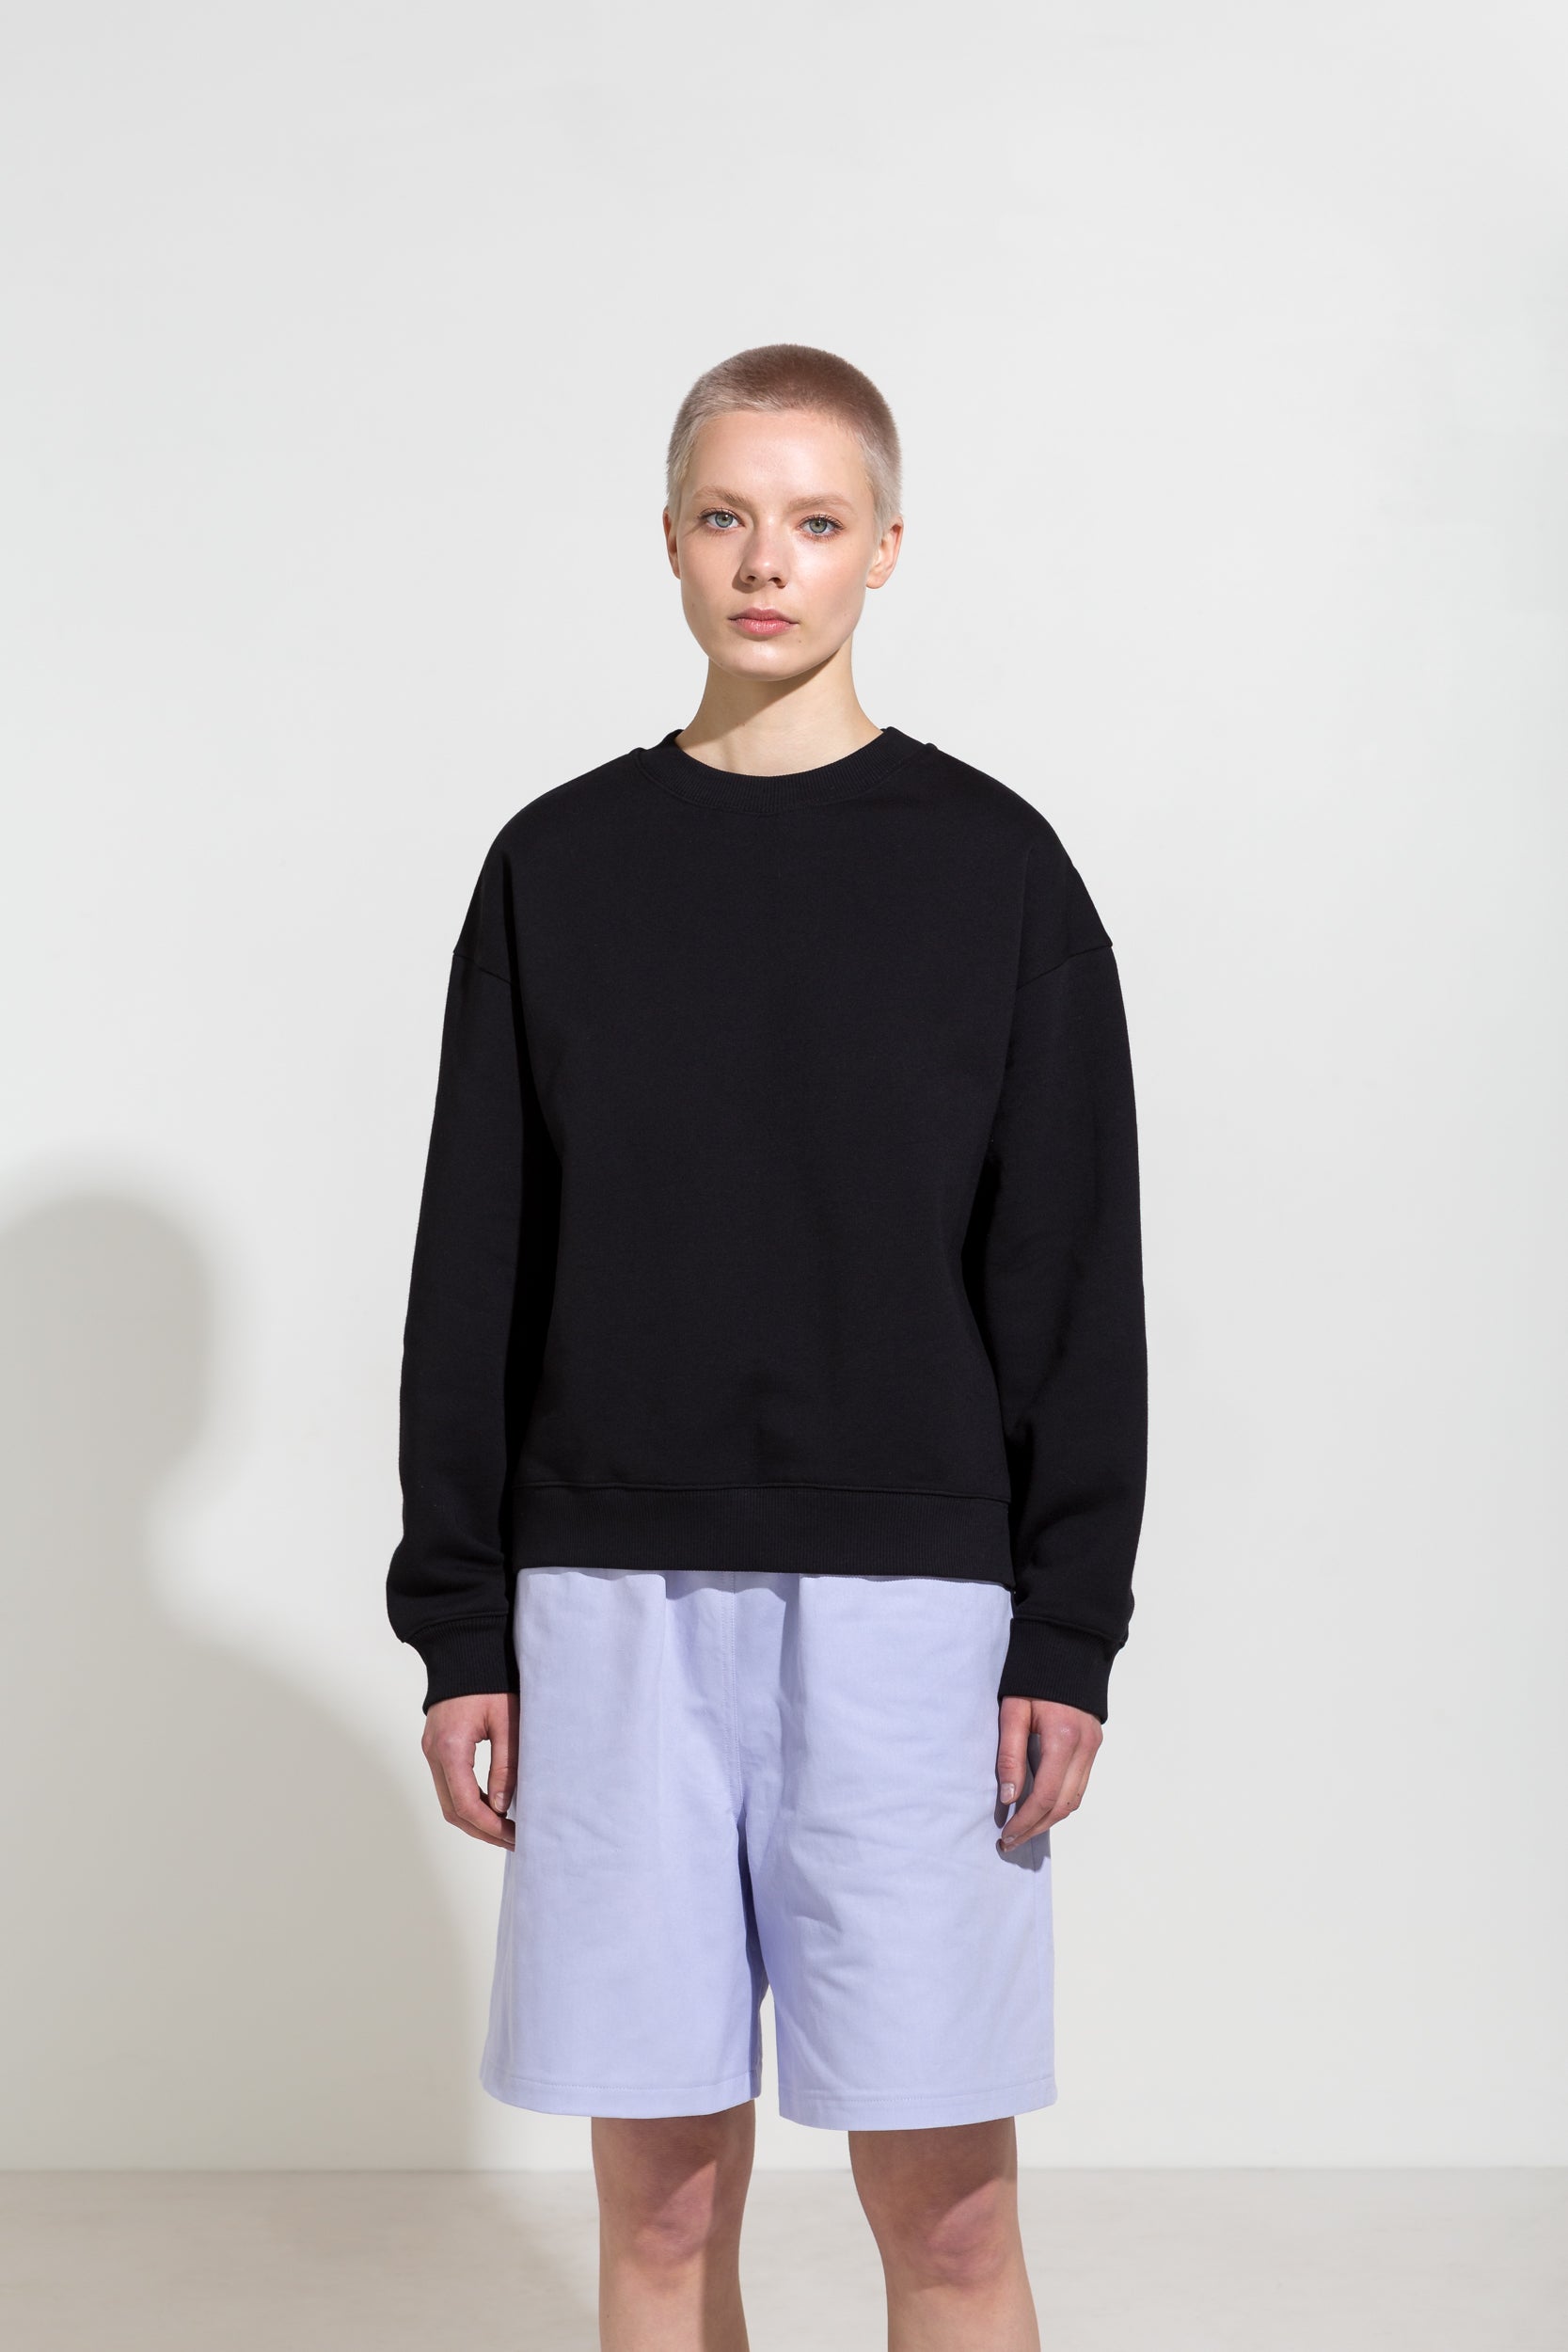 Oversized sweatshirt in black organic cotton and workwear shorts in lilac twill